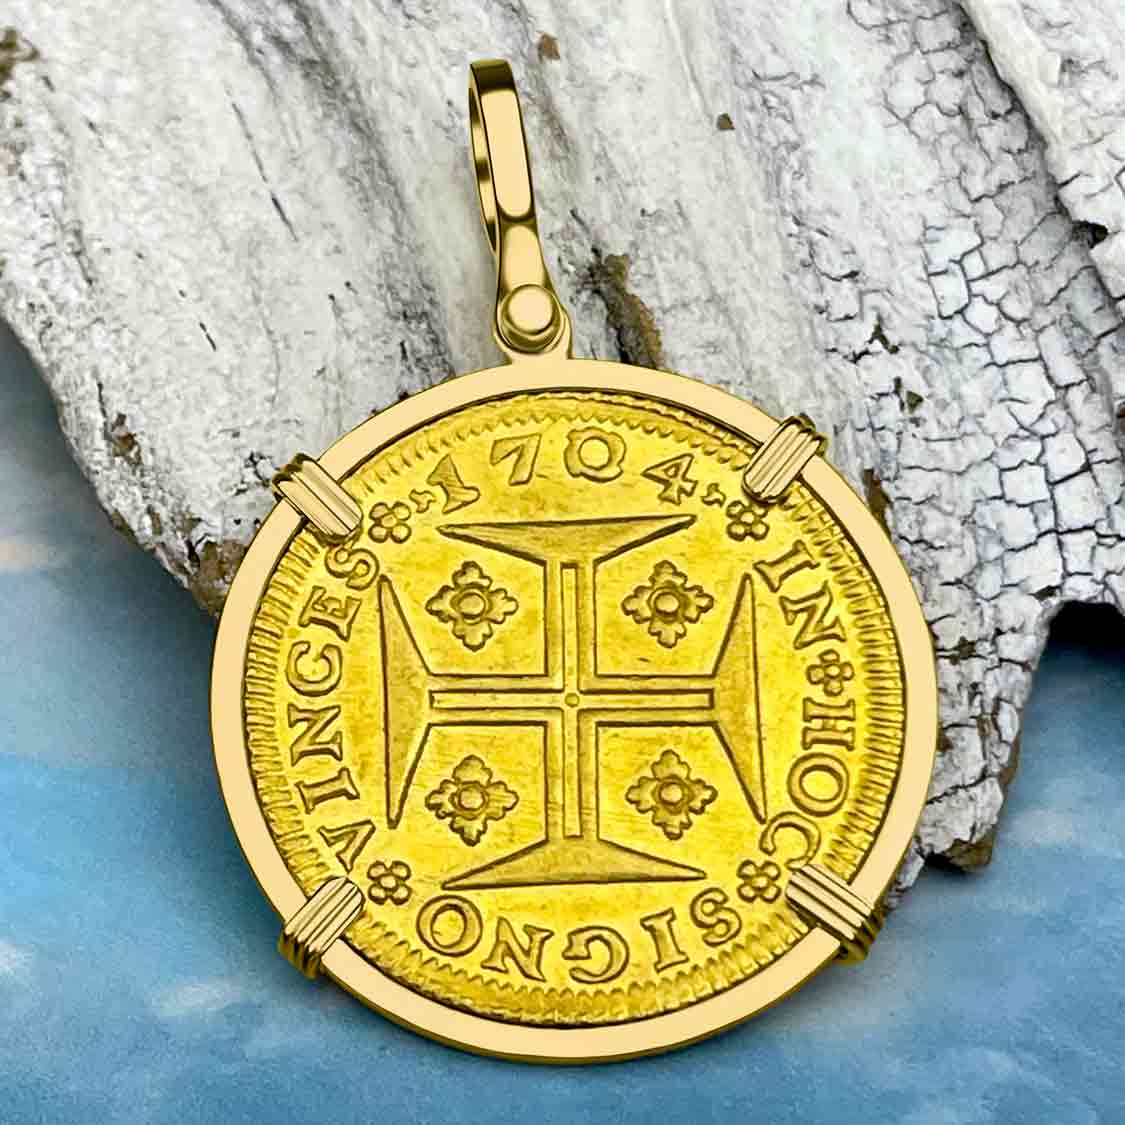 EXTREMELY RARE 1704 Portuguese 22K Gold 4000 Reis "In This Sign Conquer" Crusaders' Cross 18K Gold Coin Pendant